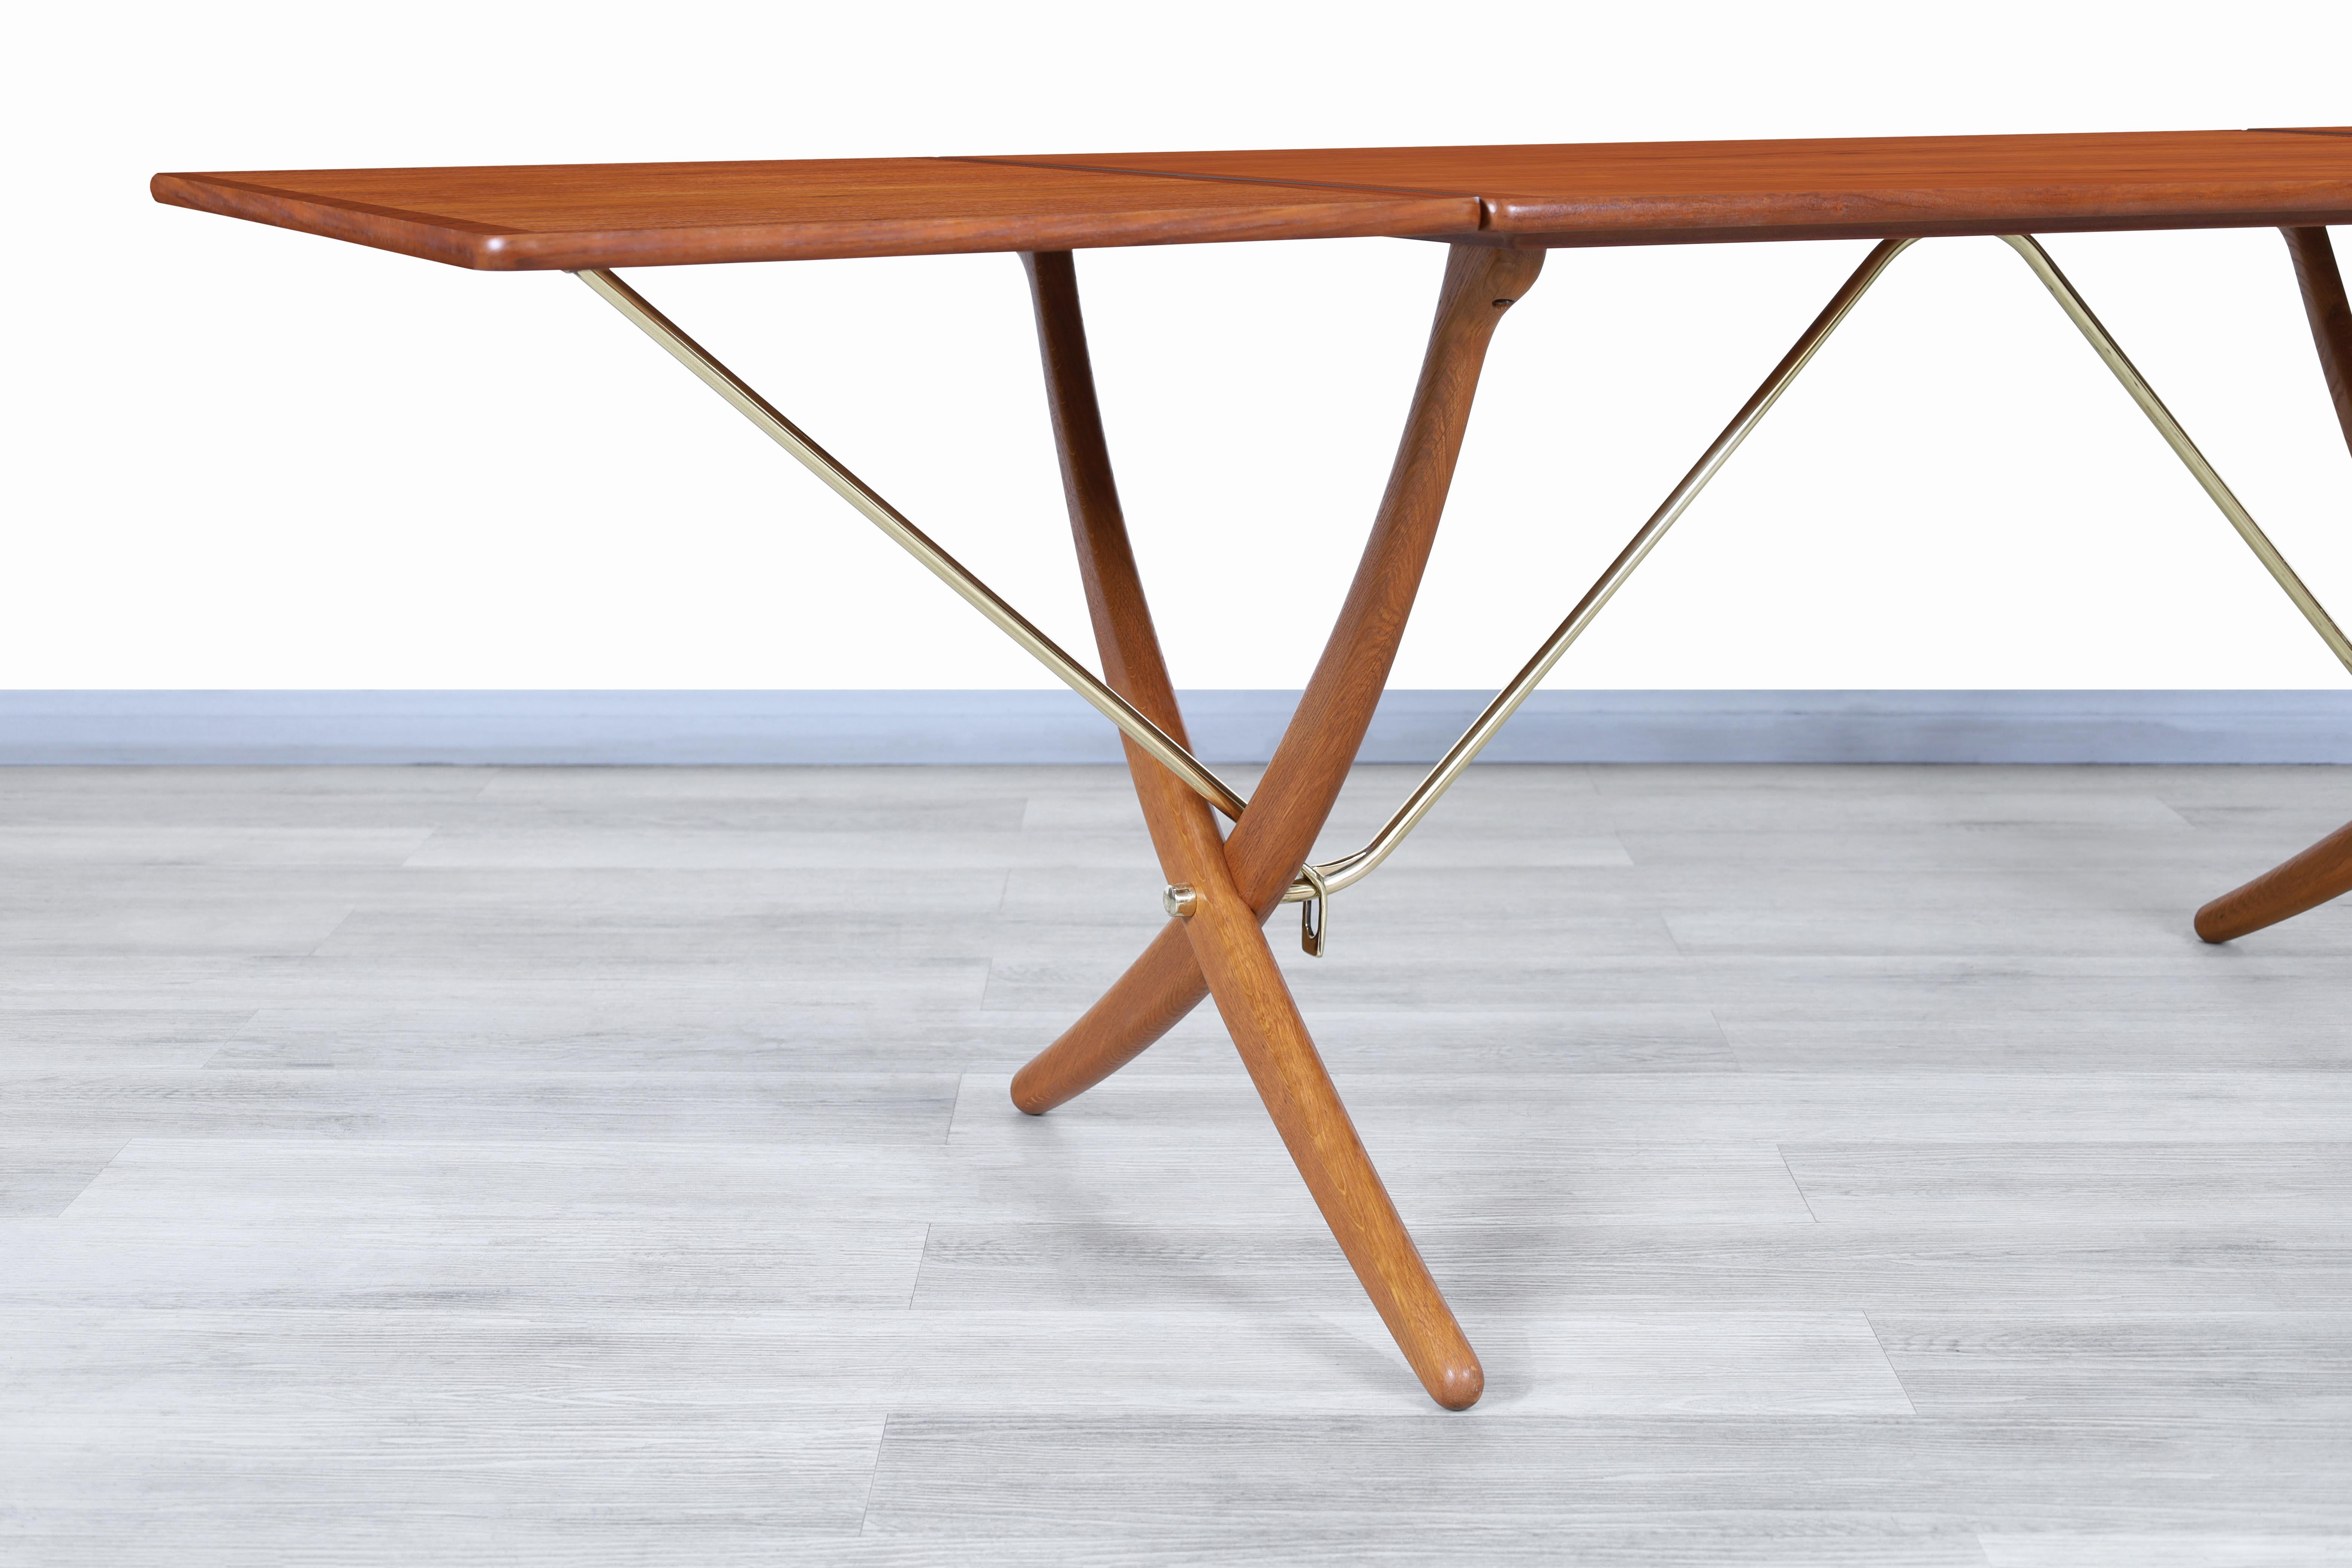 Danish Modern AT-304 Teak and Oak Dining Table by Hans J. Wegner In Excellent Condition For Sale In North Hollywood, CA